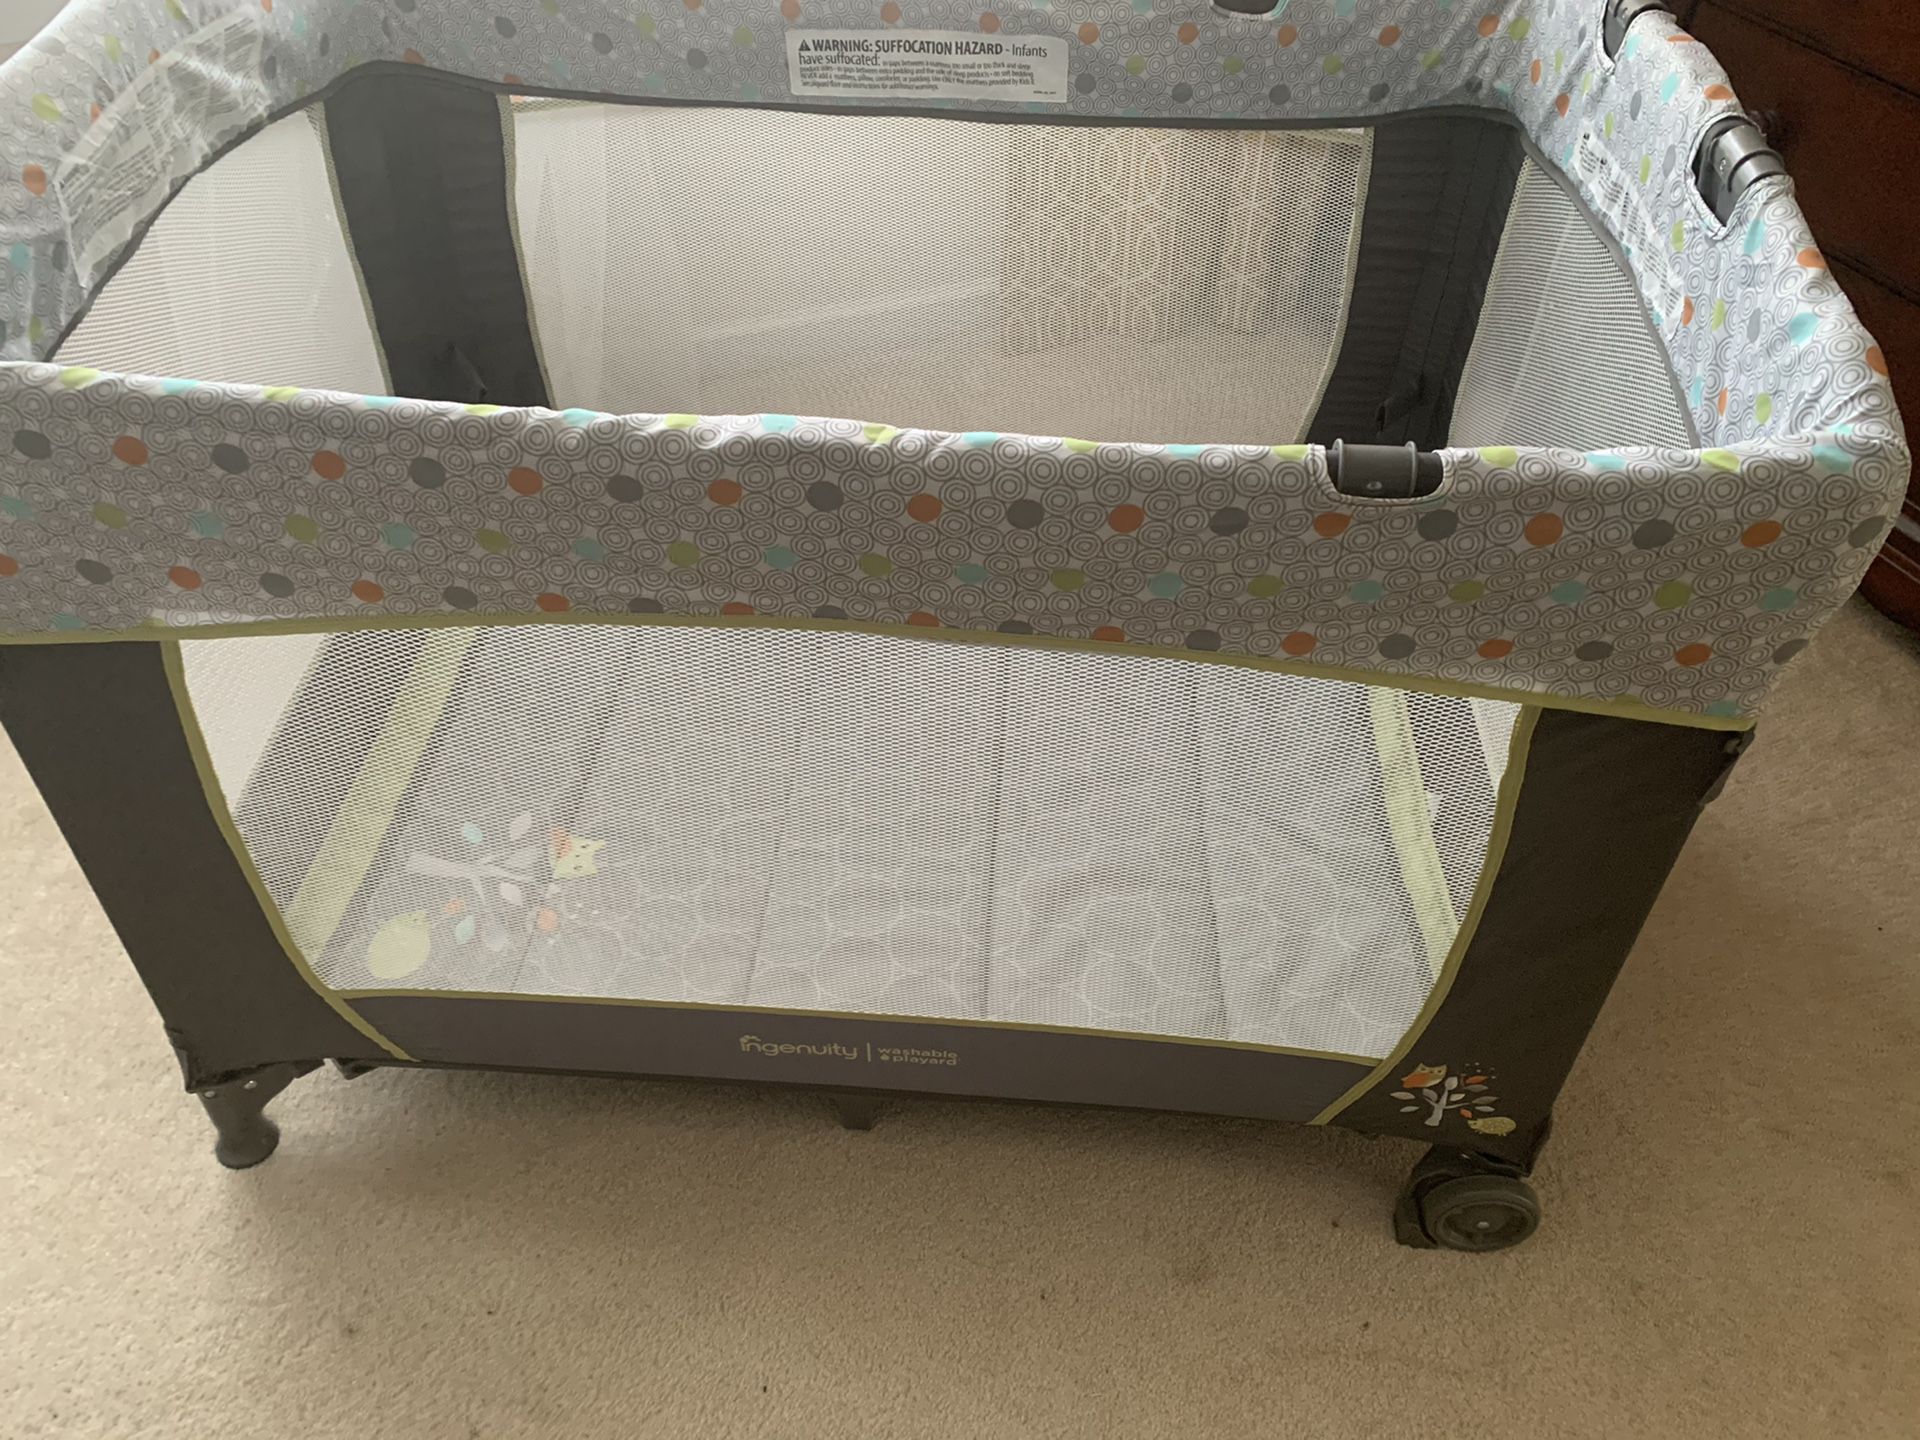 Pack and play with changing table and bassinet By Ingenuity